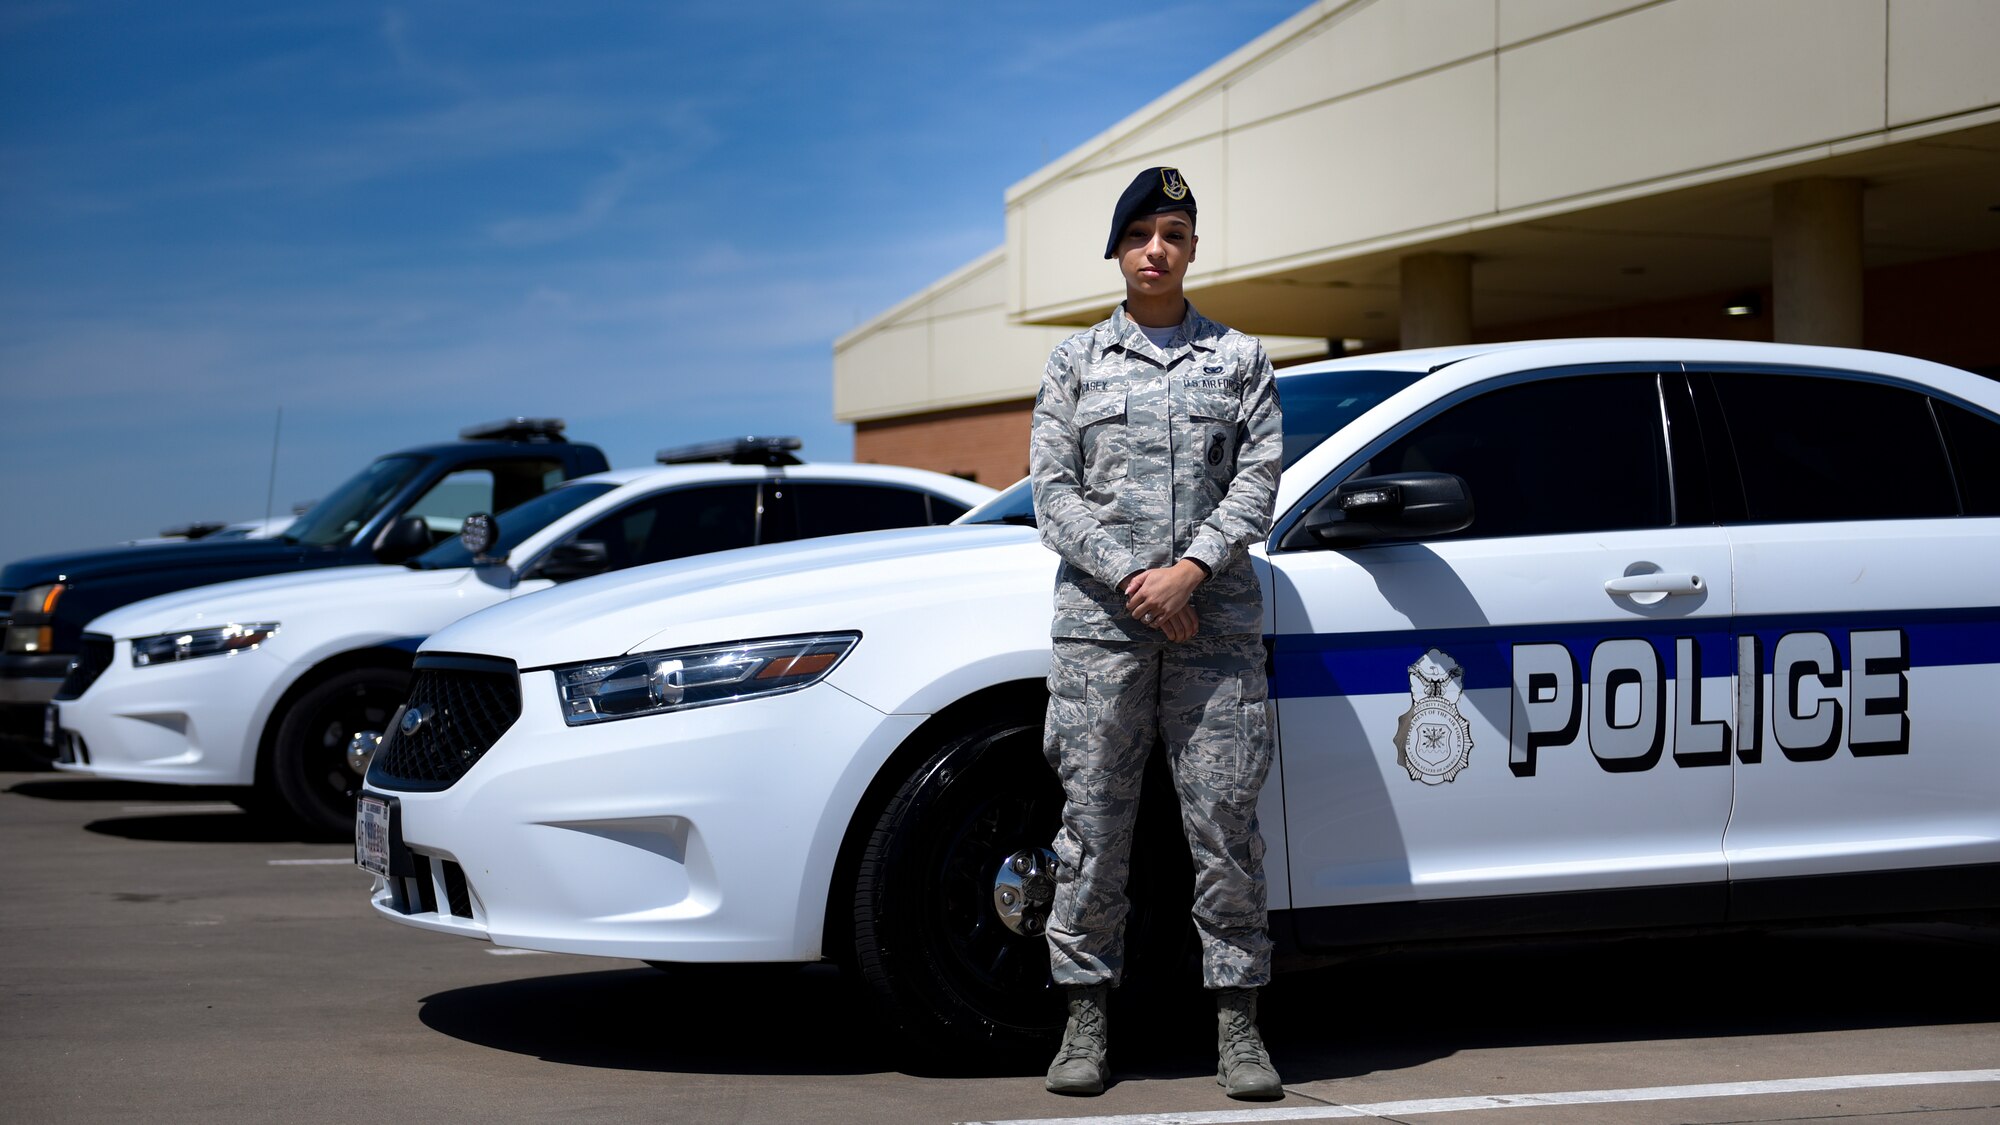 Security Forces Airman poses for a photo in front of her patrol car